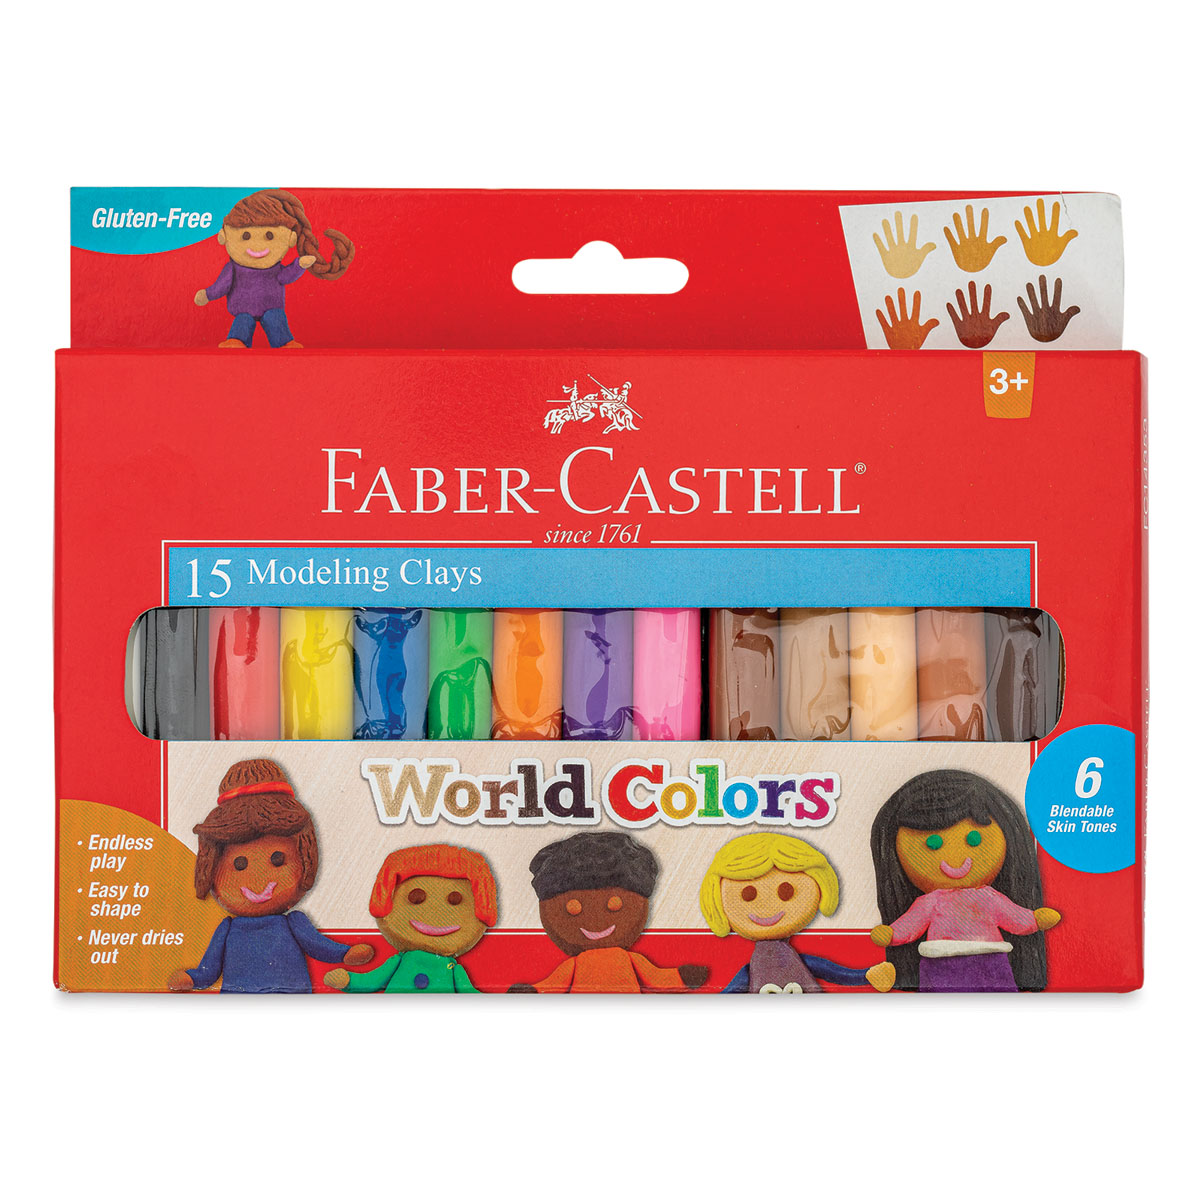 FaberCastell World Colors Modeling Clay Set